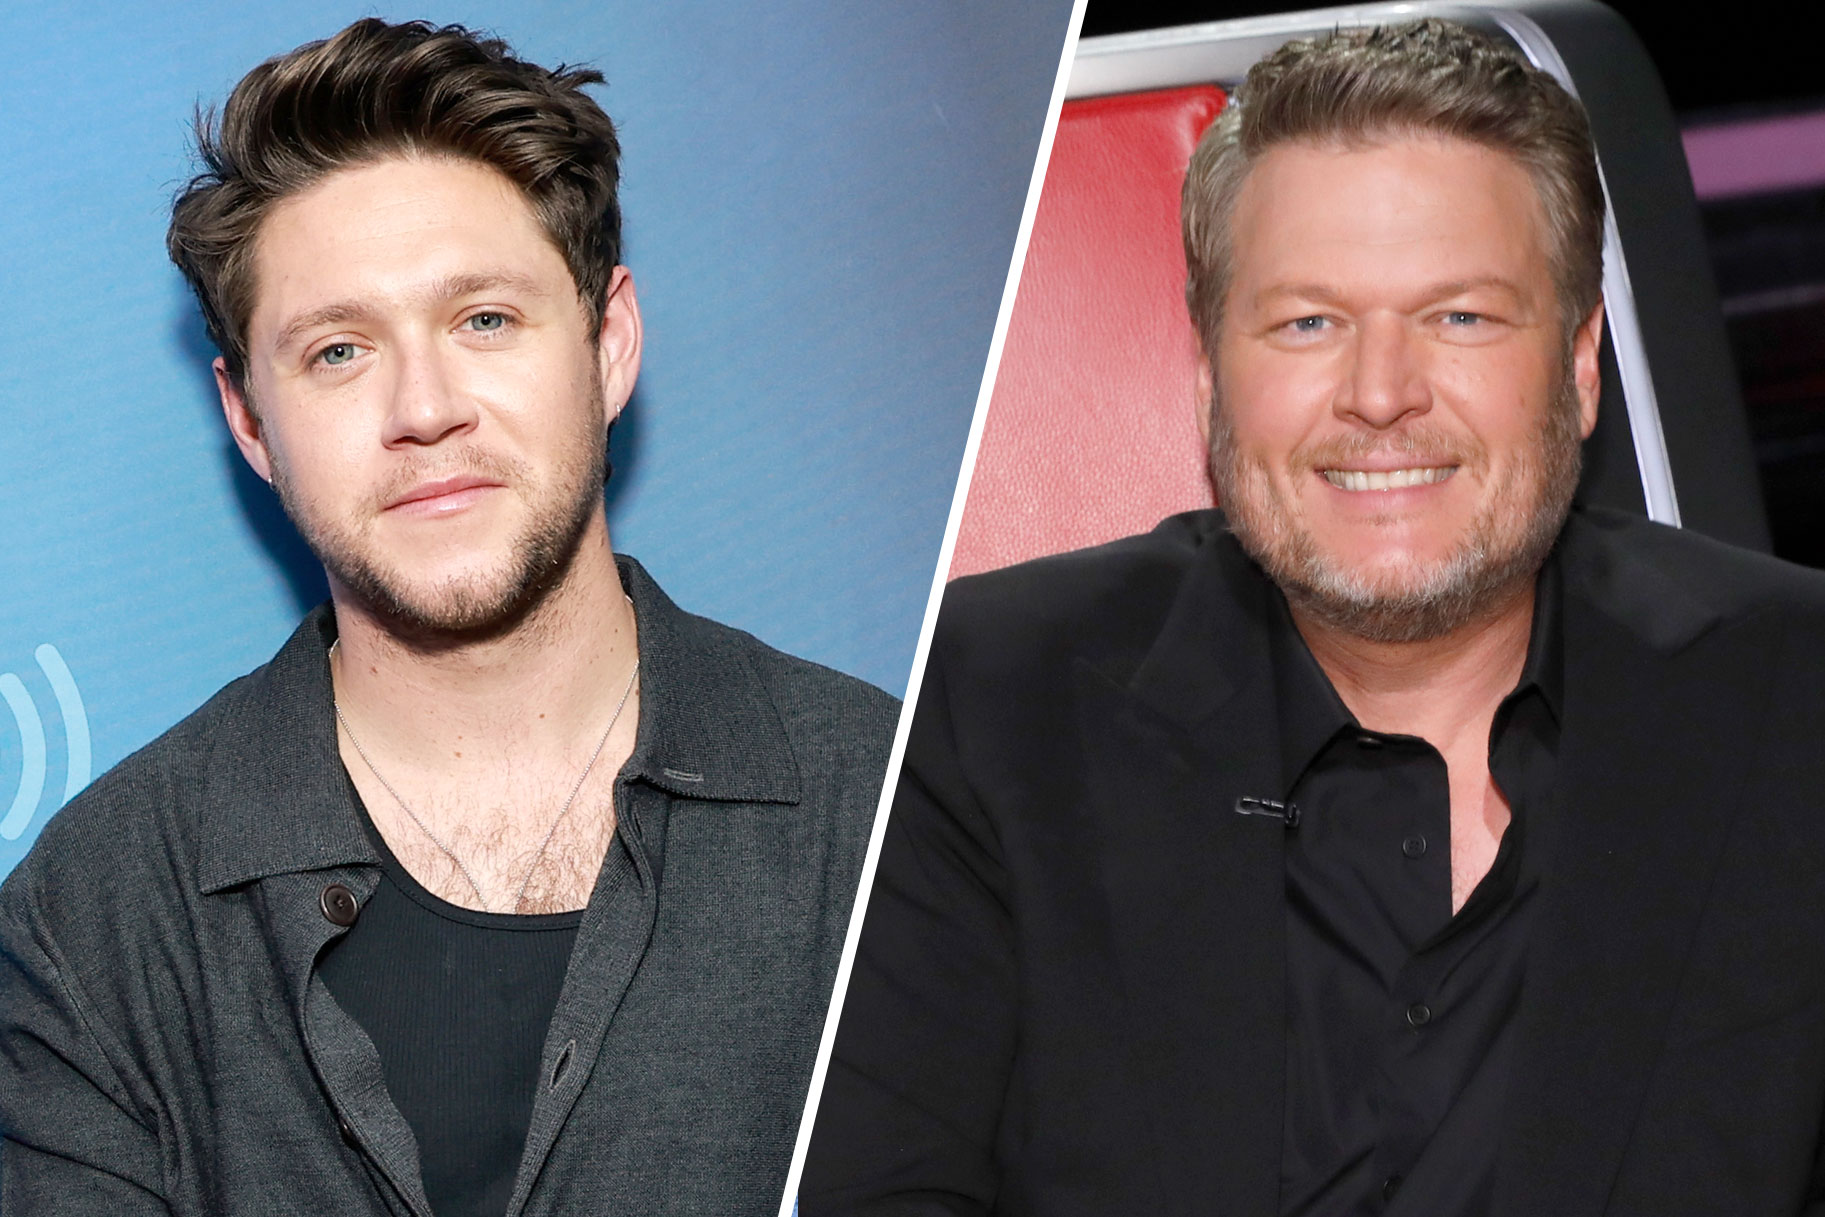 Niall Horan and Blake Shelton on The Voice